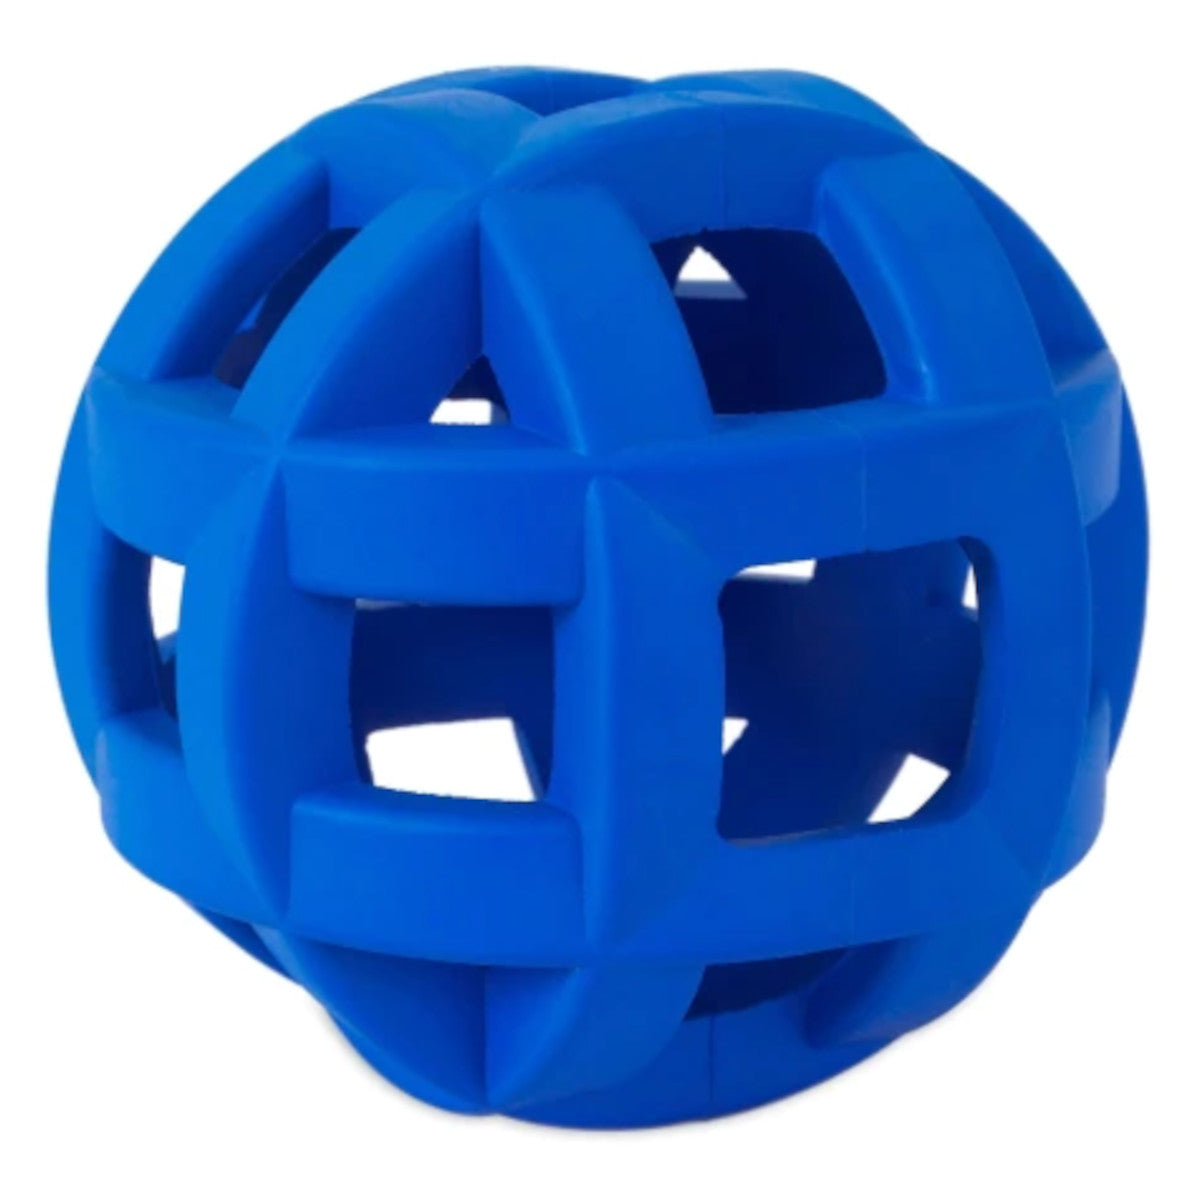 JW Hol-ee Roller X - Fun-Filled Do It All Puzzle Ball for Dogs.